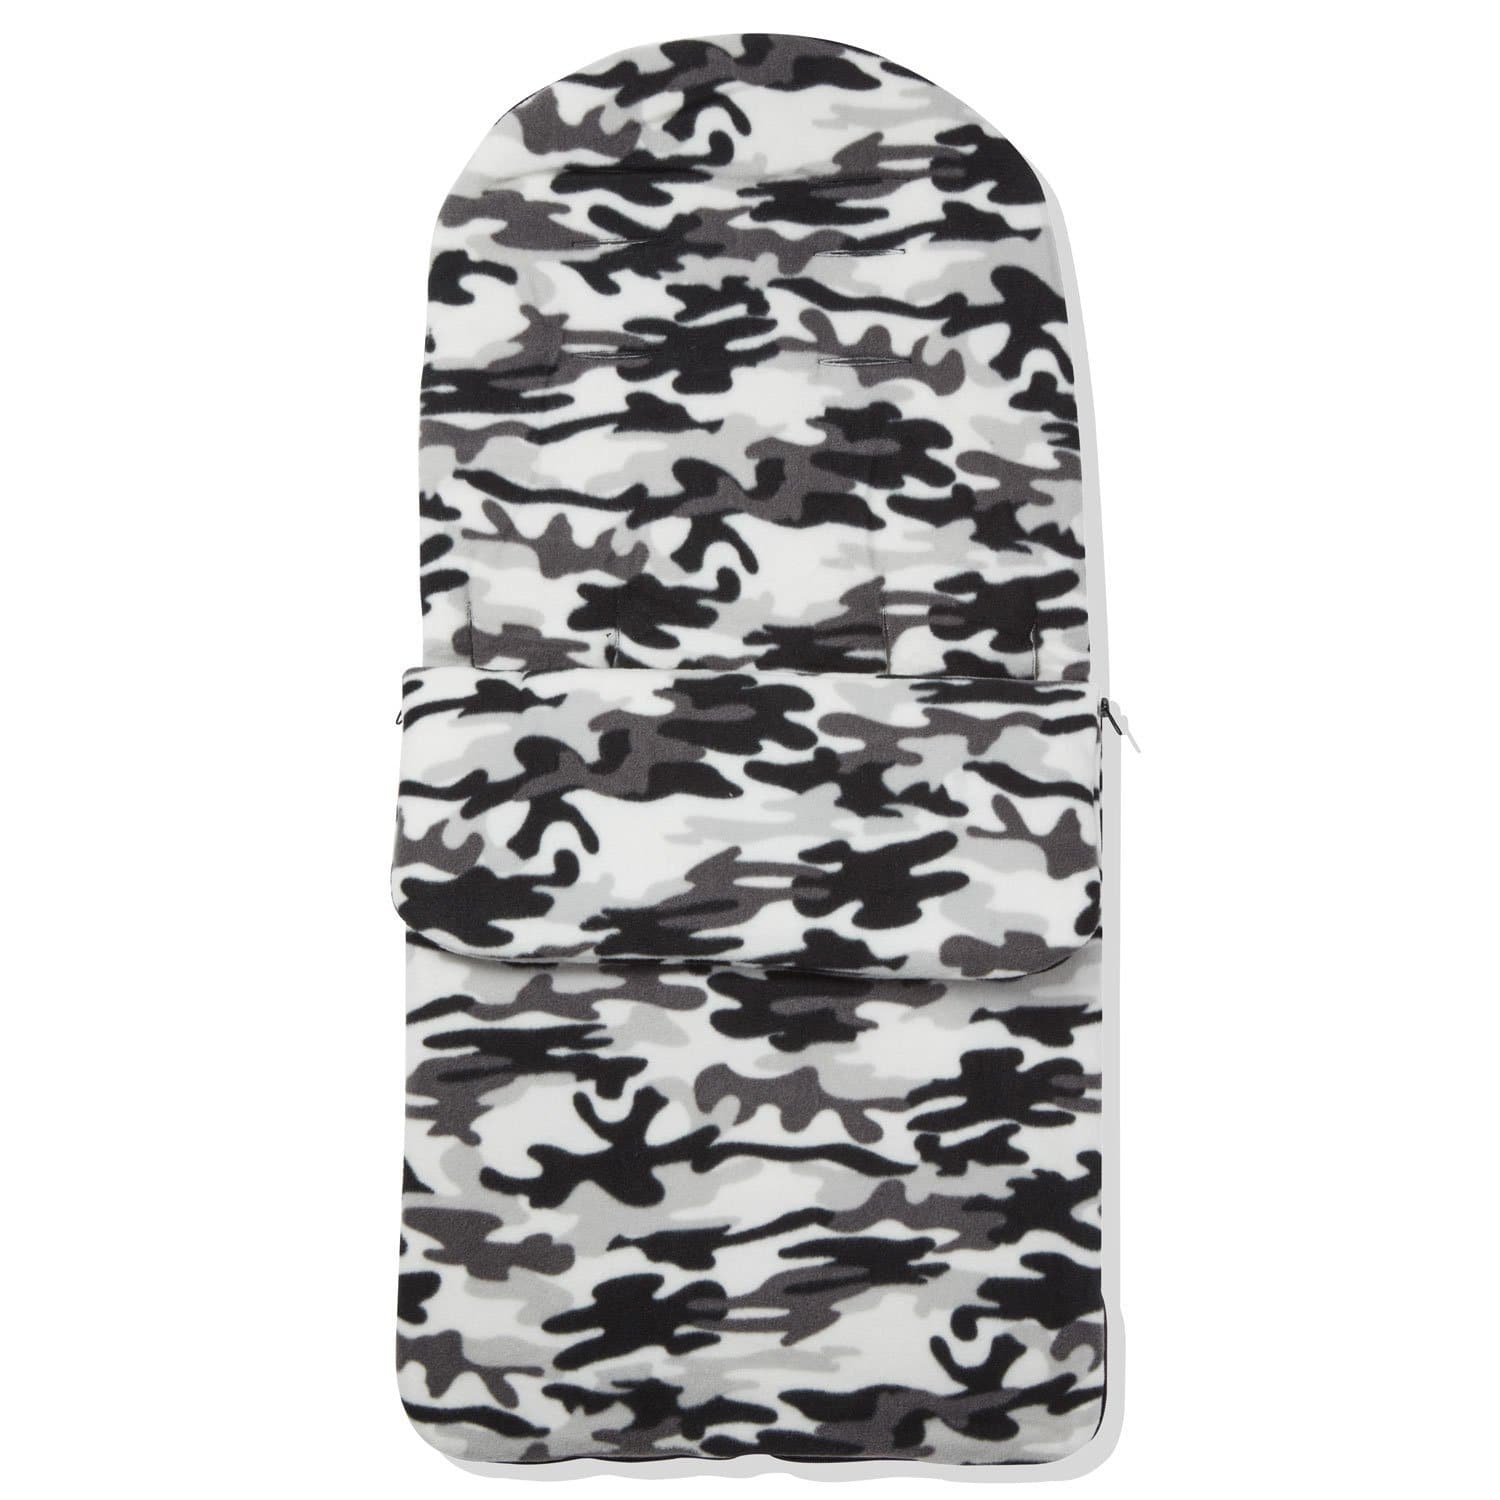 Fleece Footmuff / Cosy Toes Compatible with Babylo - Grey Camouflage / Fits All Models | For Your Little One